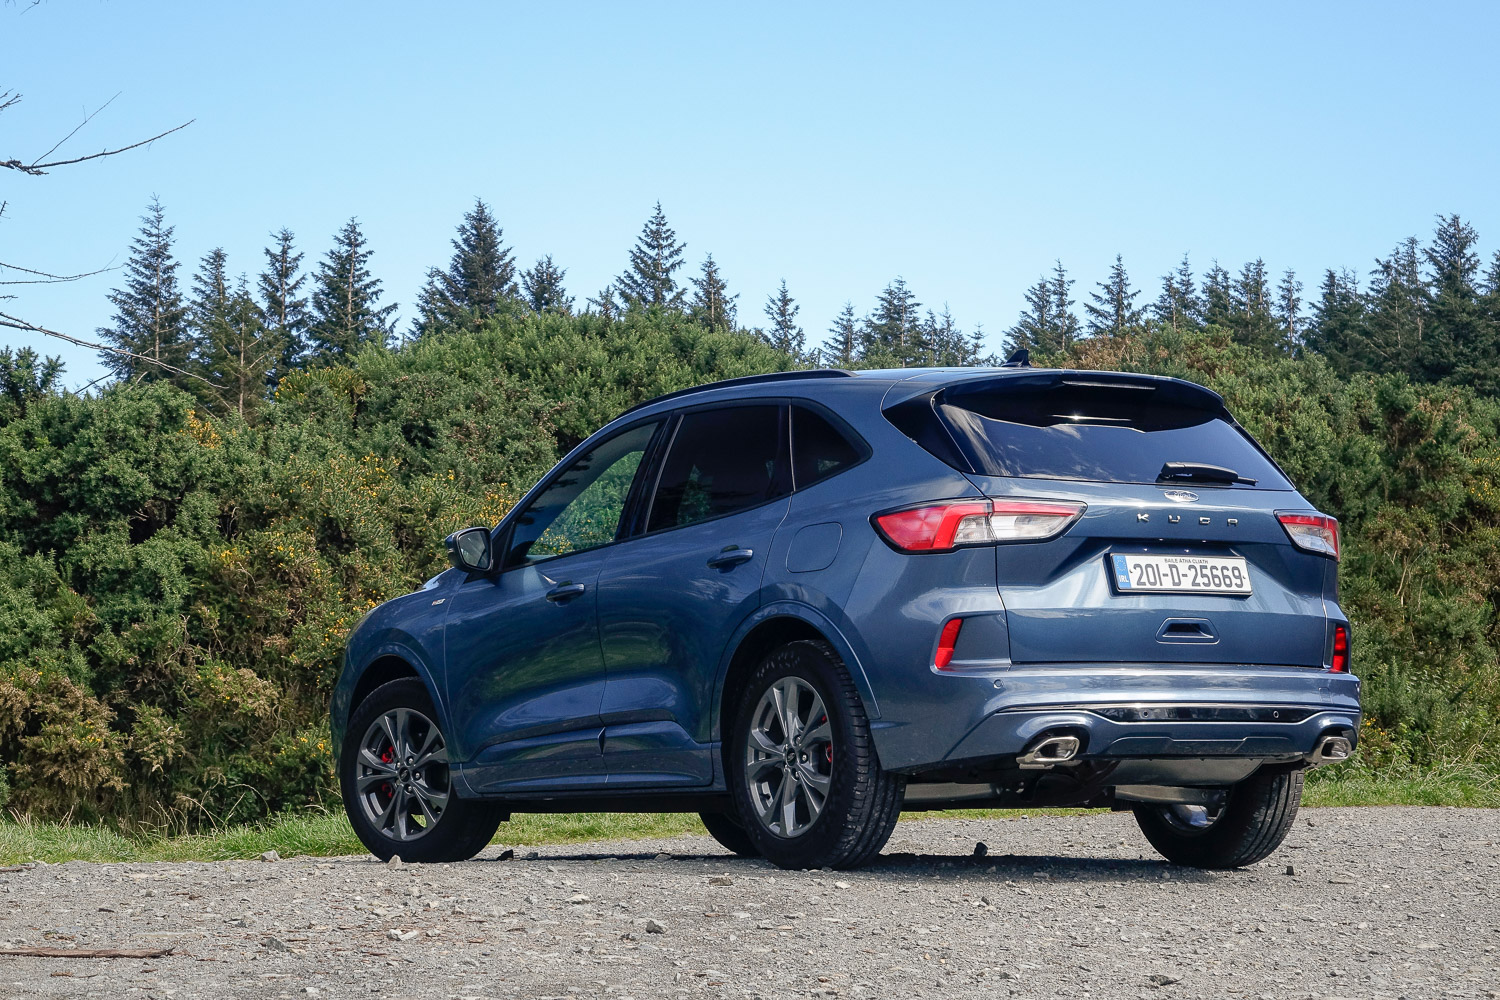 Ford Kuga 1.5 EcoBlue diesel (2020) Reviews Complete Car